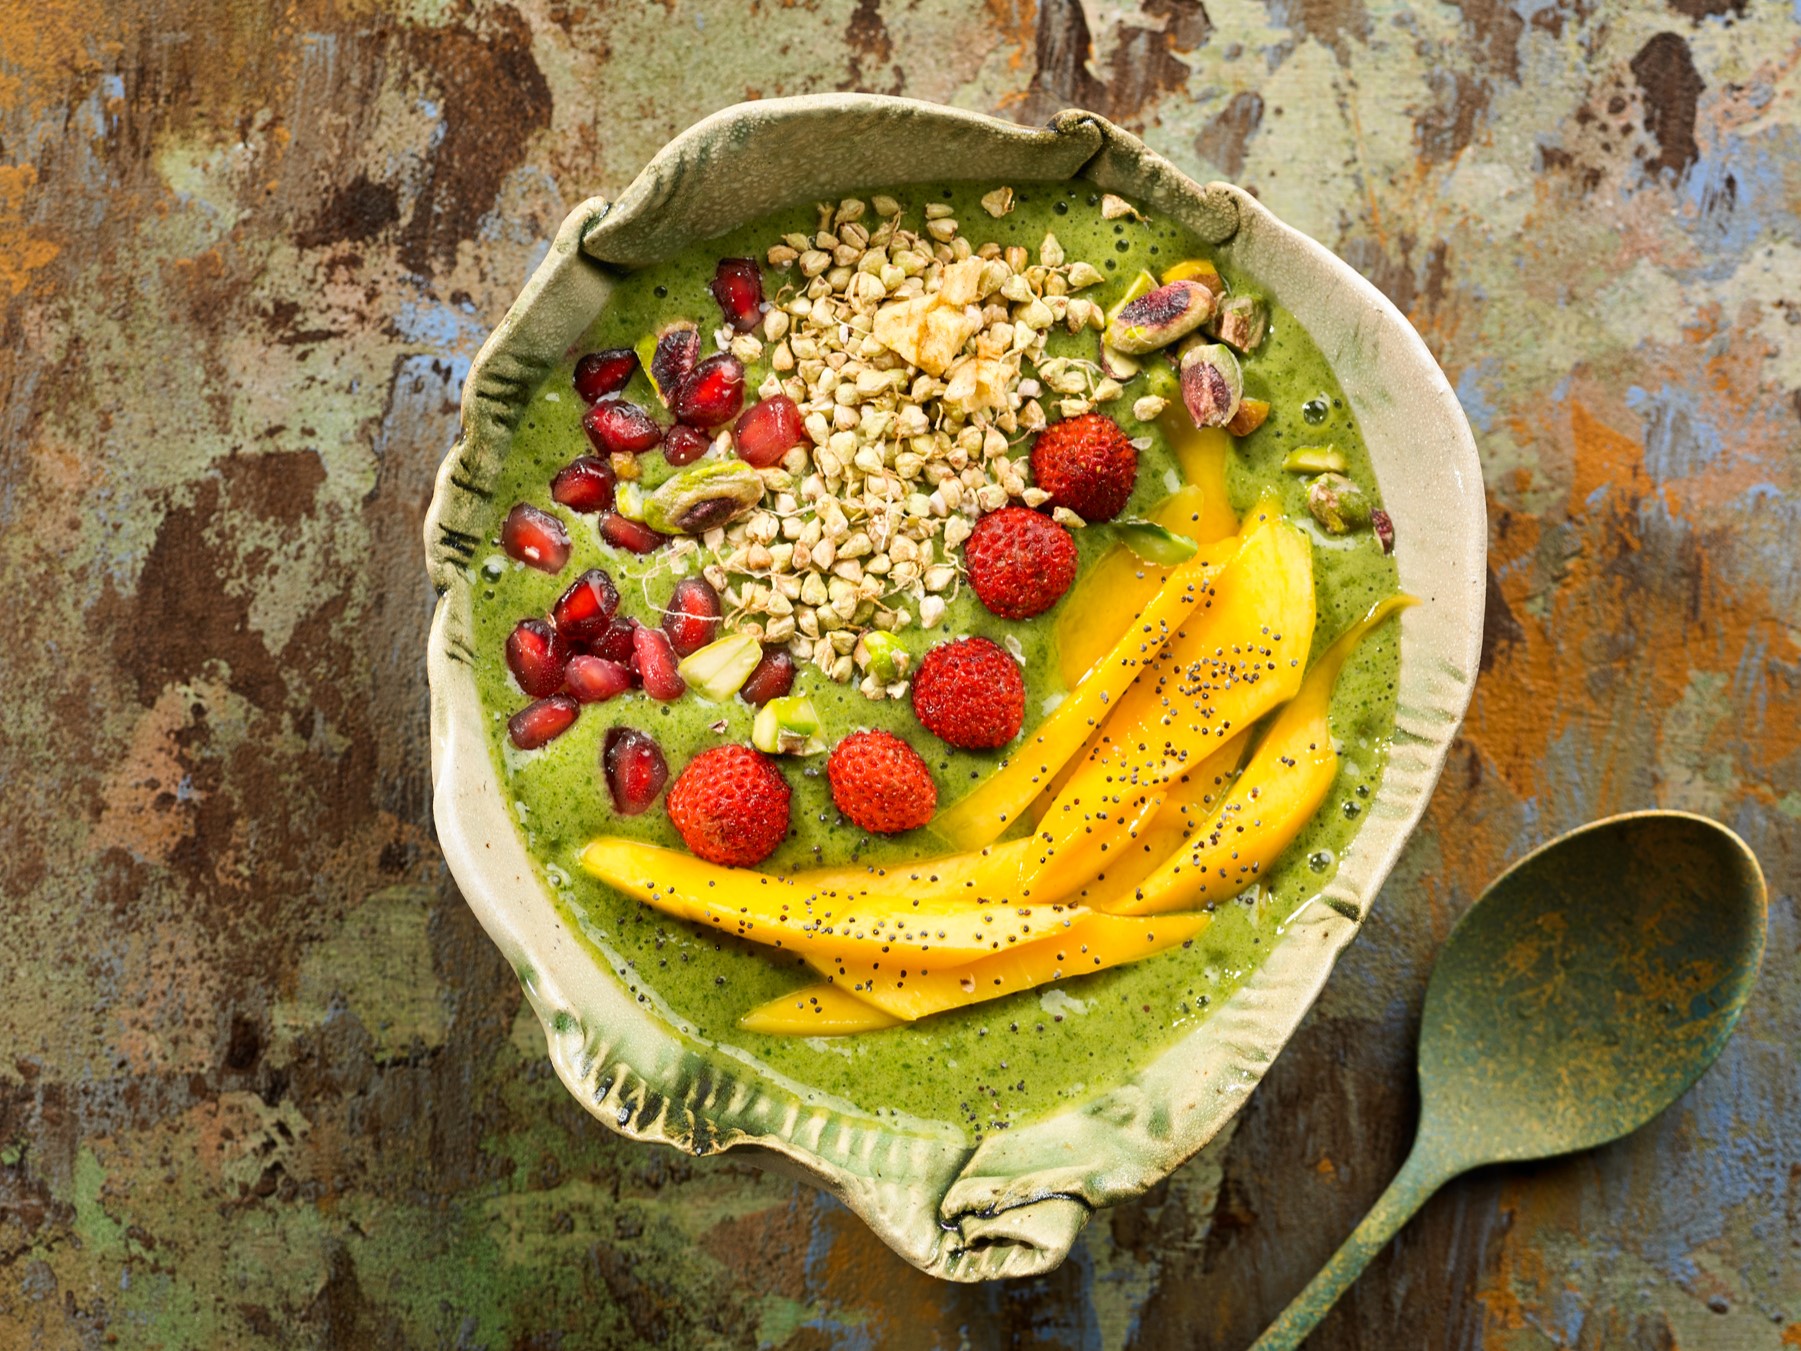 The Superfood Green Smoothie Bowl